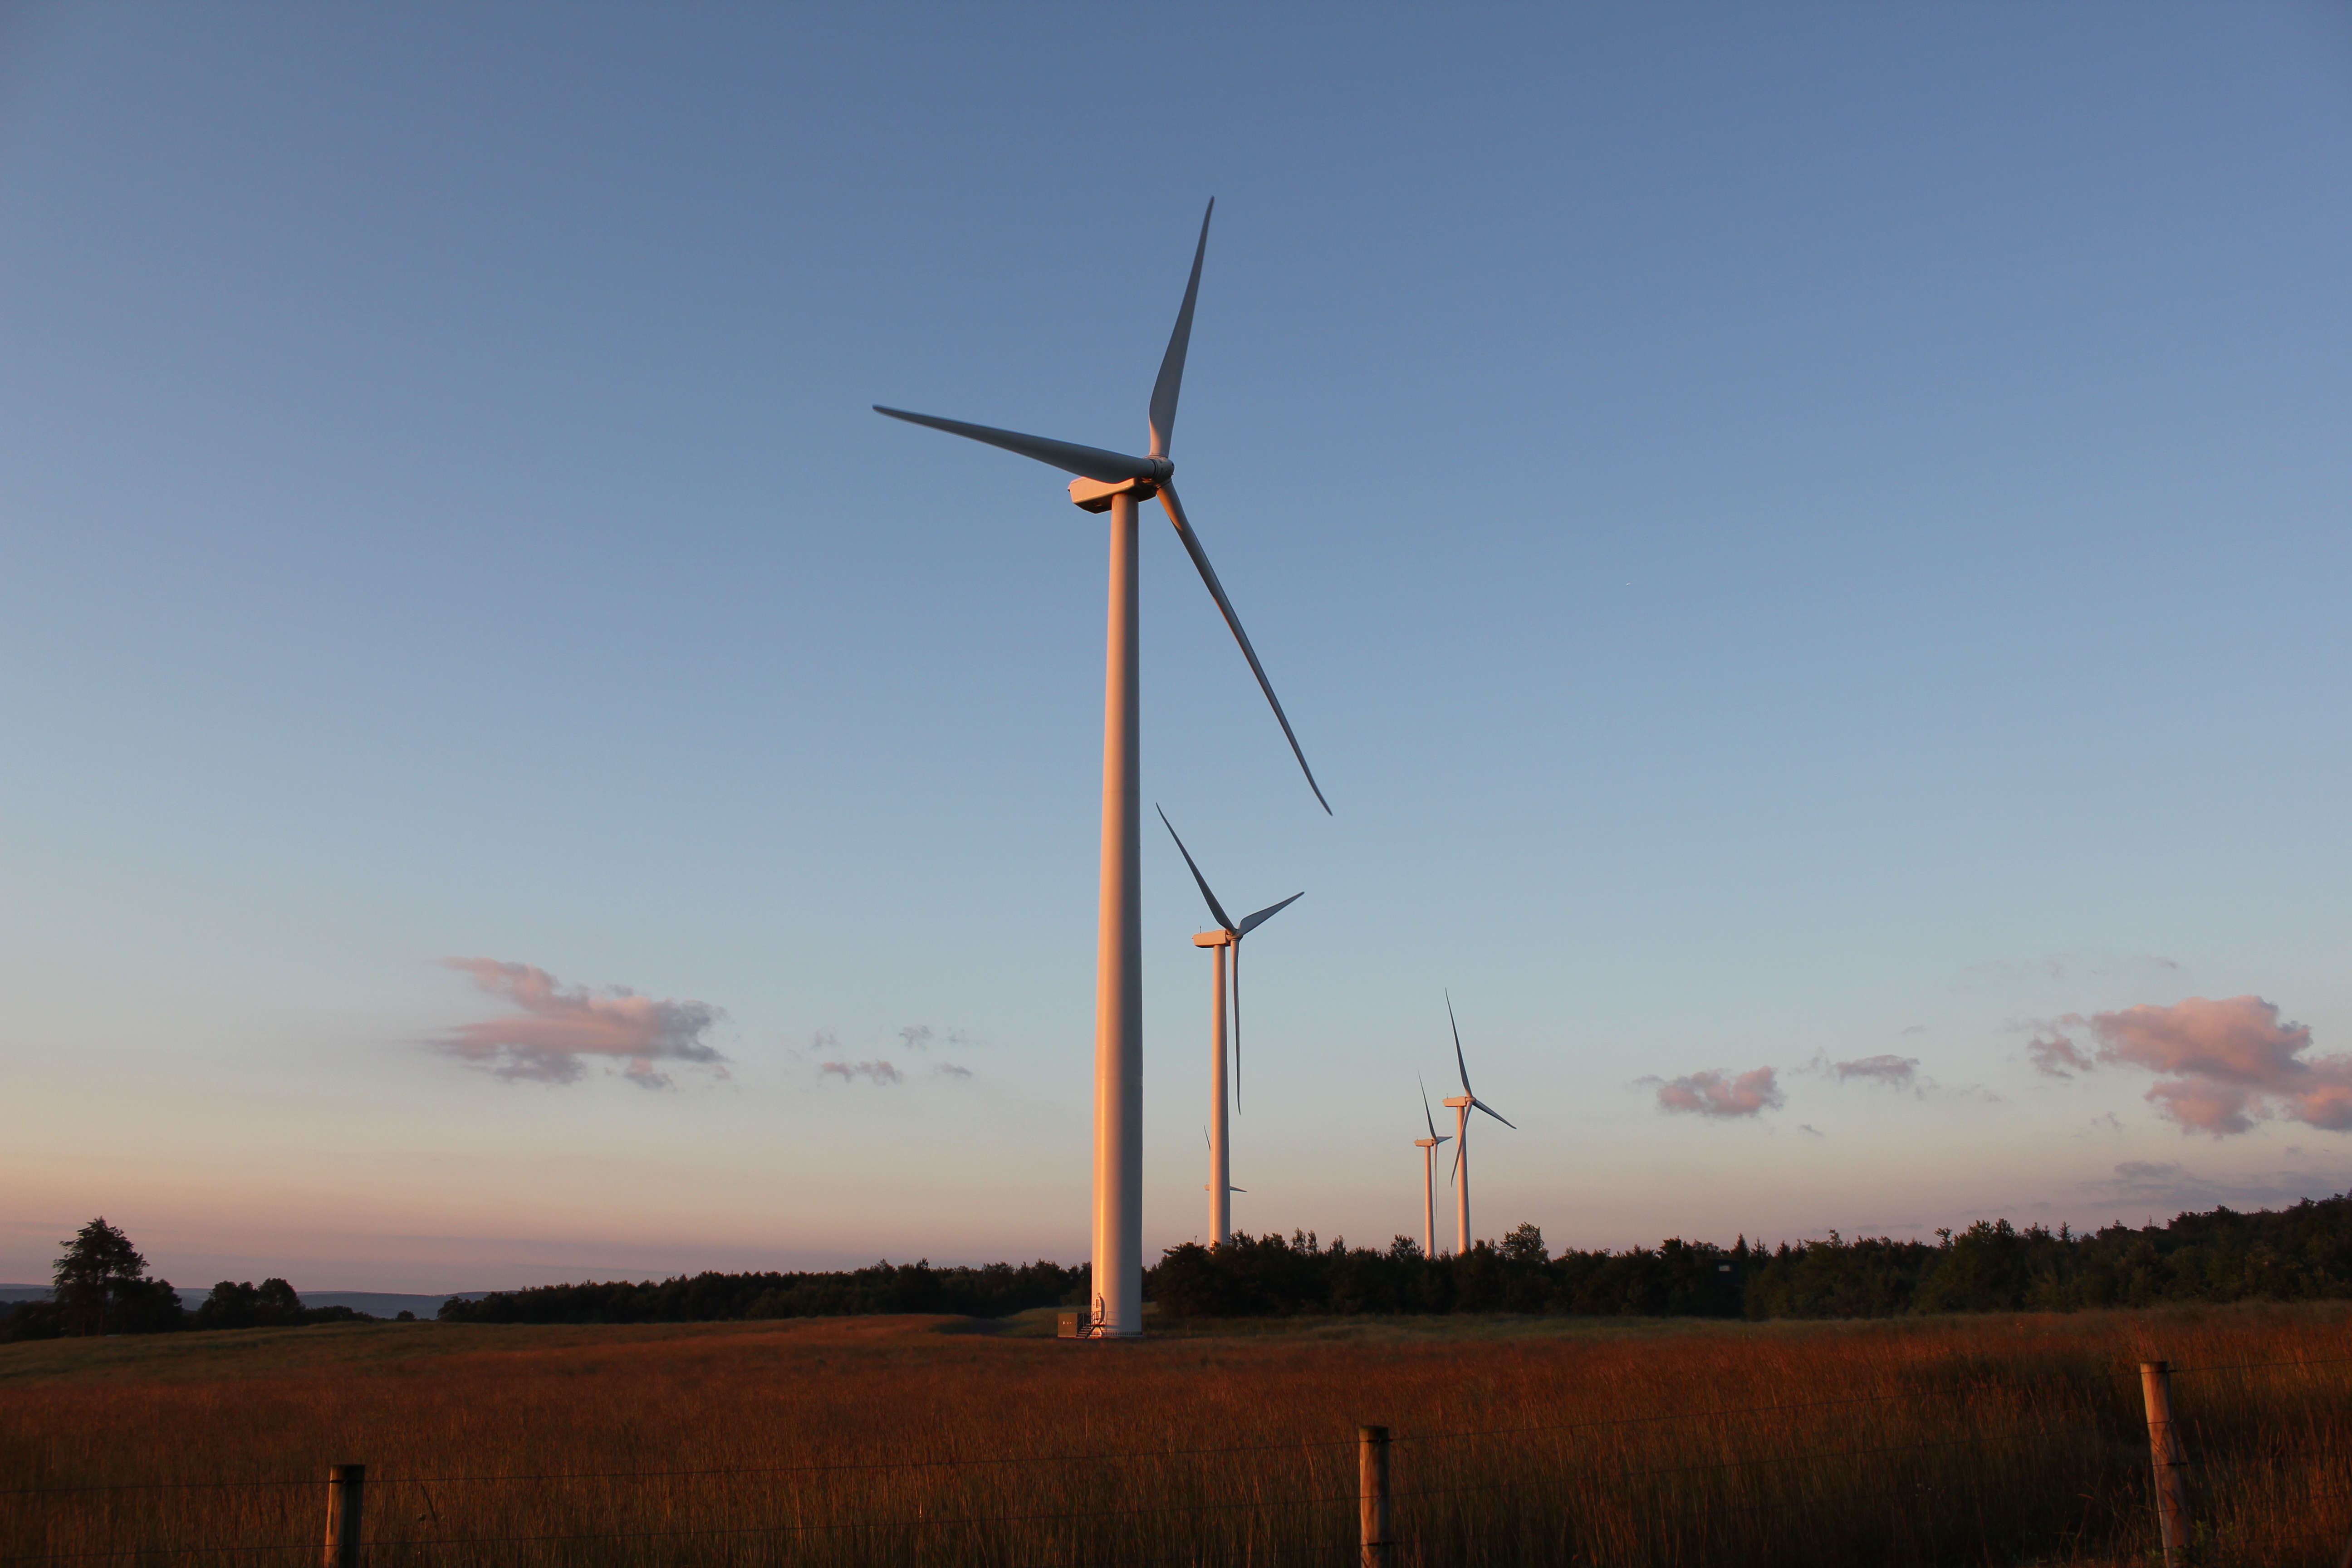 A herd of deer passes in front of a group of wind turbines rising over dry grass. Blue skies are visible in the background